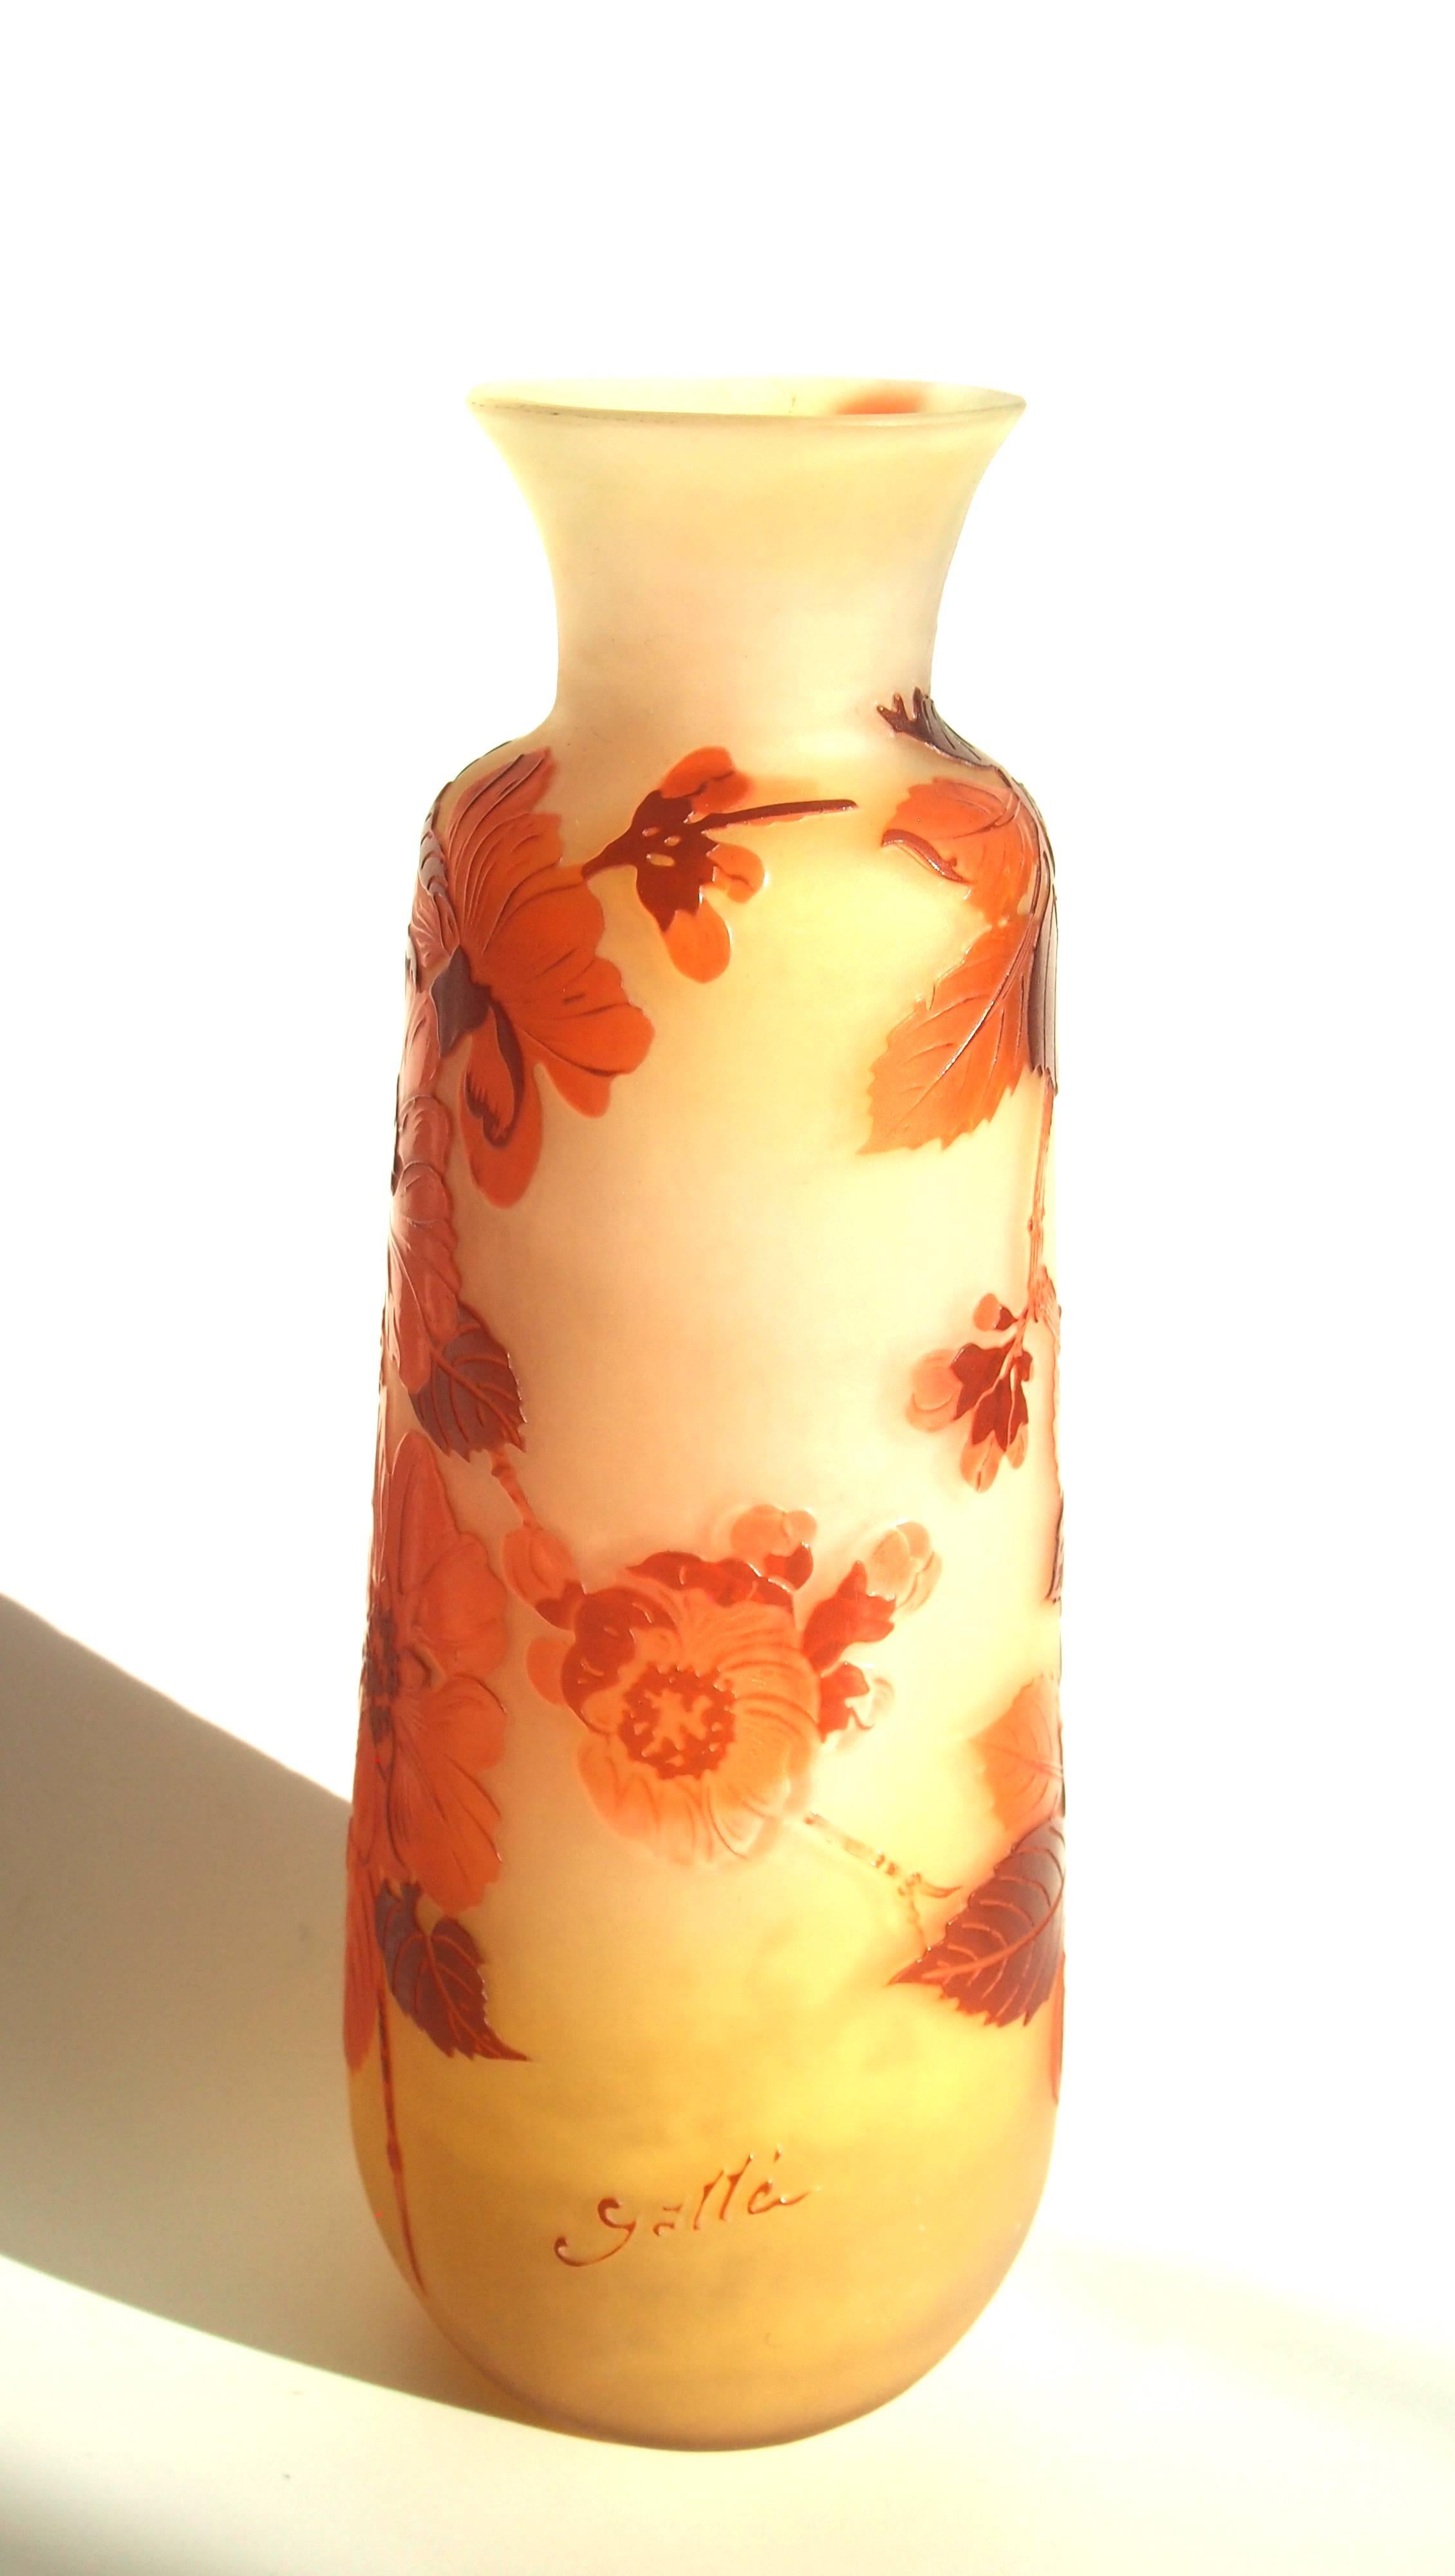 Unusual Emile Galle cameo vase in dark red, and bright red over orange depicting Apple blossom falling from above (most Emile Galle images are from the bottom up only a few of his finest vases have the image coming down from above), circa 1900,